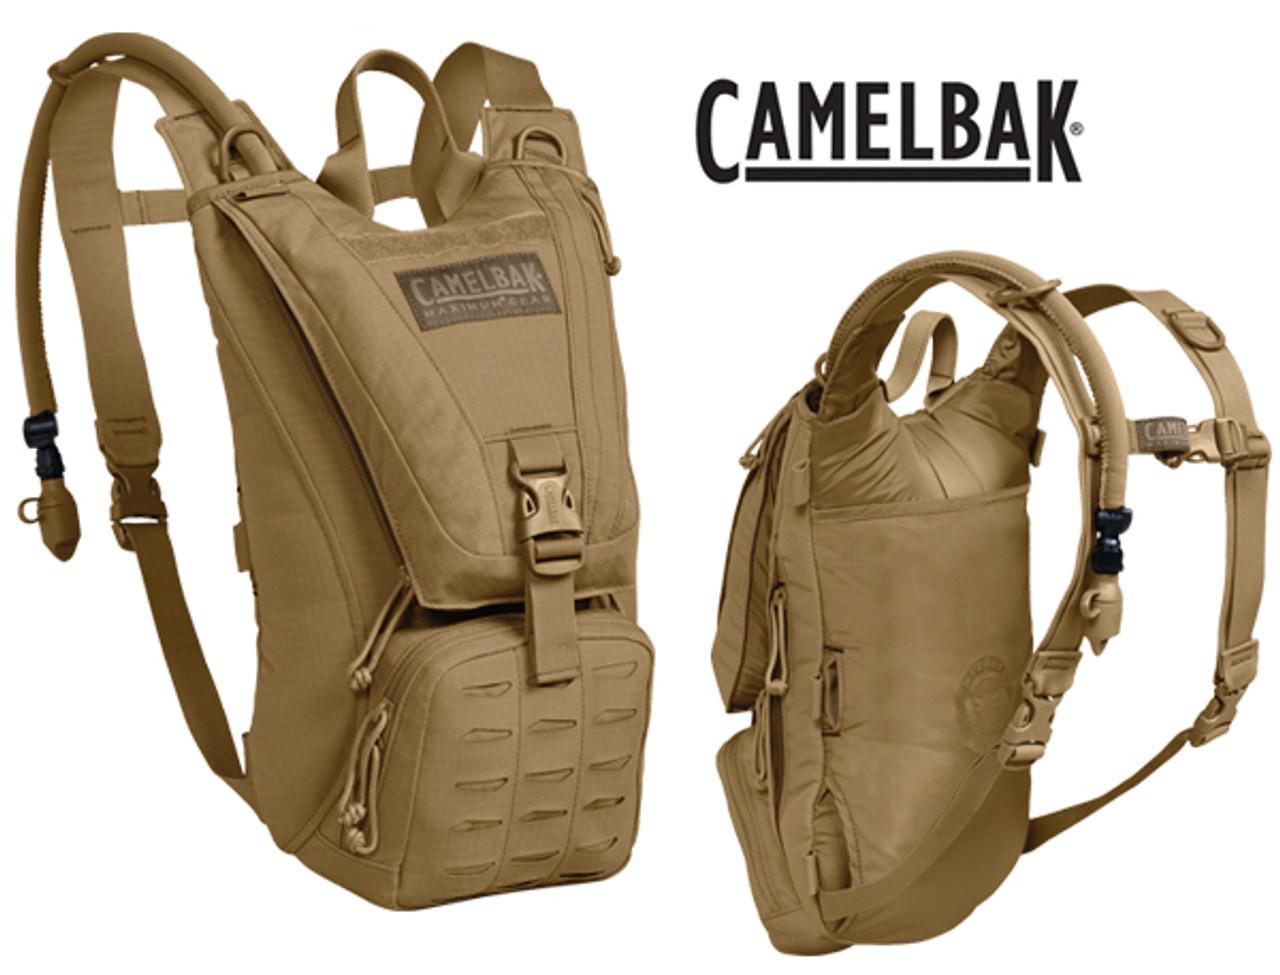 Coyote AMBUSH By Camelbak With Mil-Spec Antidote